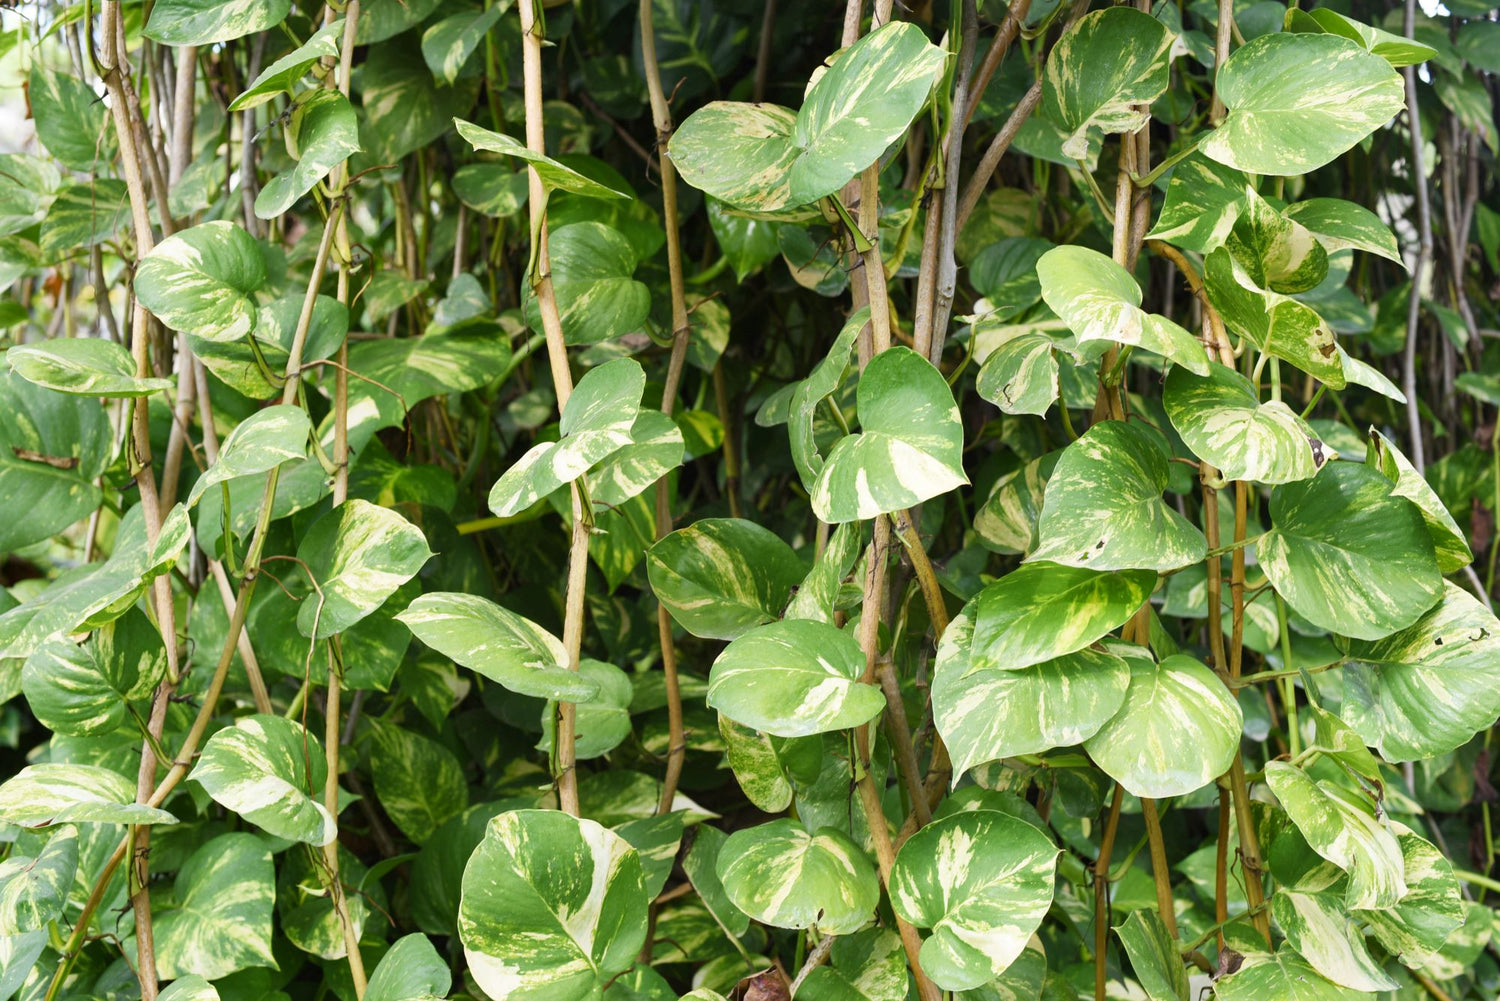 A large Hawaiian pothos vine with green and yellow variegated leaves climbing in a thick wall of vines. The plant basks in bright indirect sunlight, which illuminates the leaves, making them appear vibrant and lush.